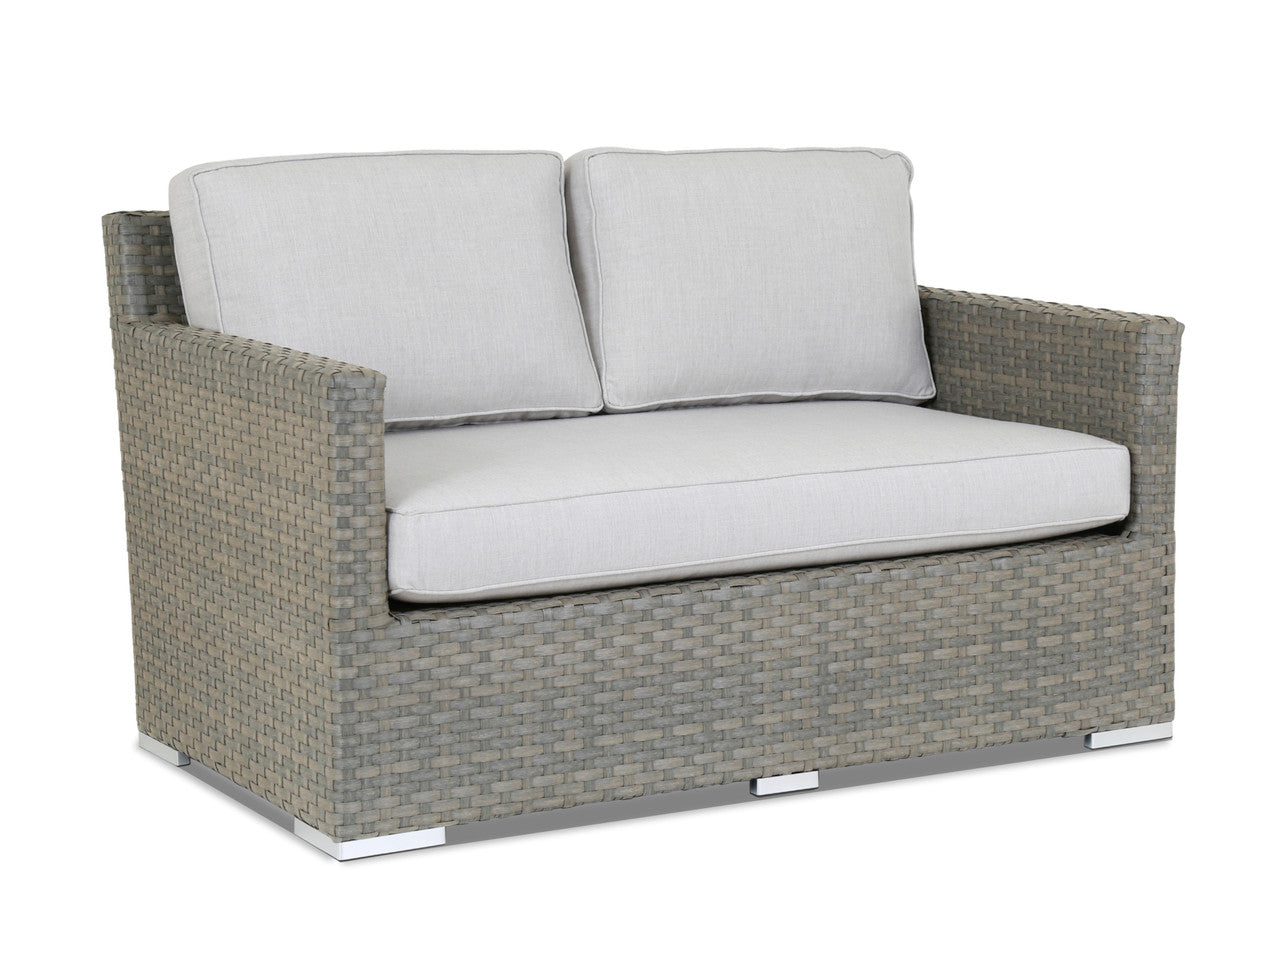 Replacement Cushions for Sunset West Majorca Loveseat